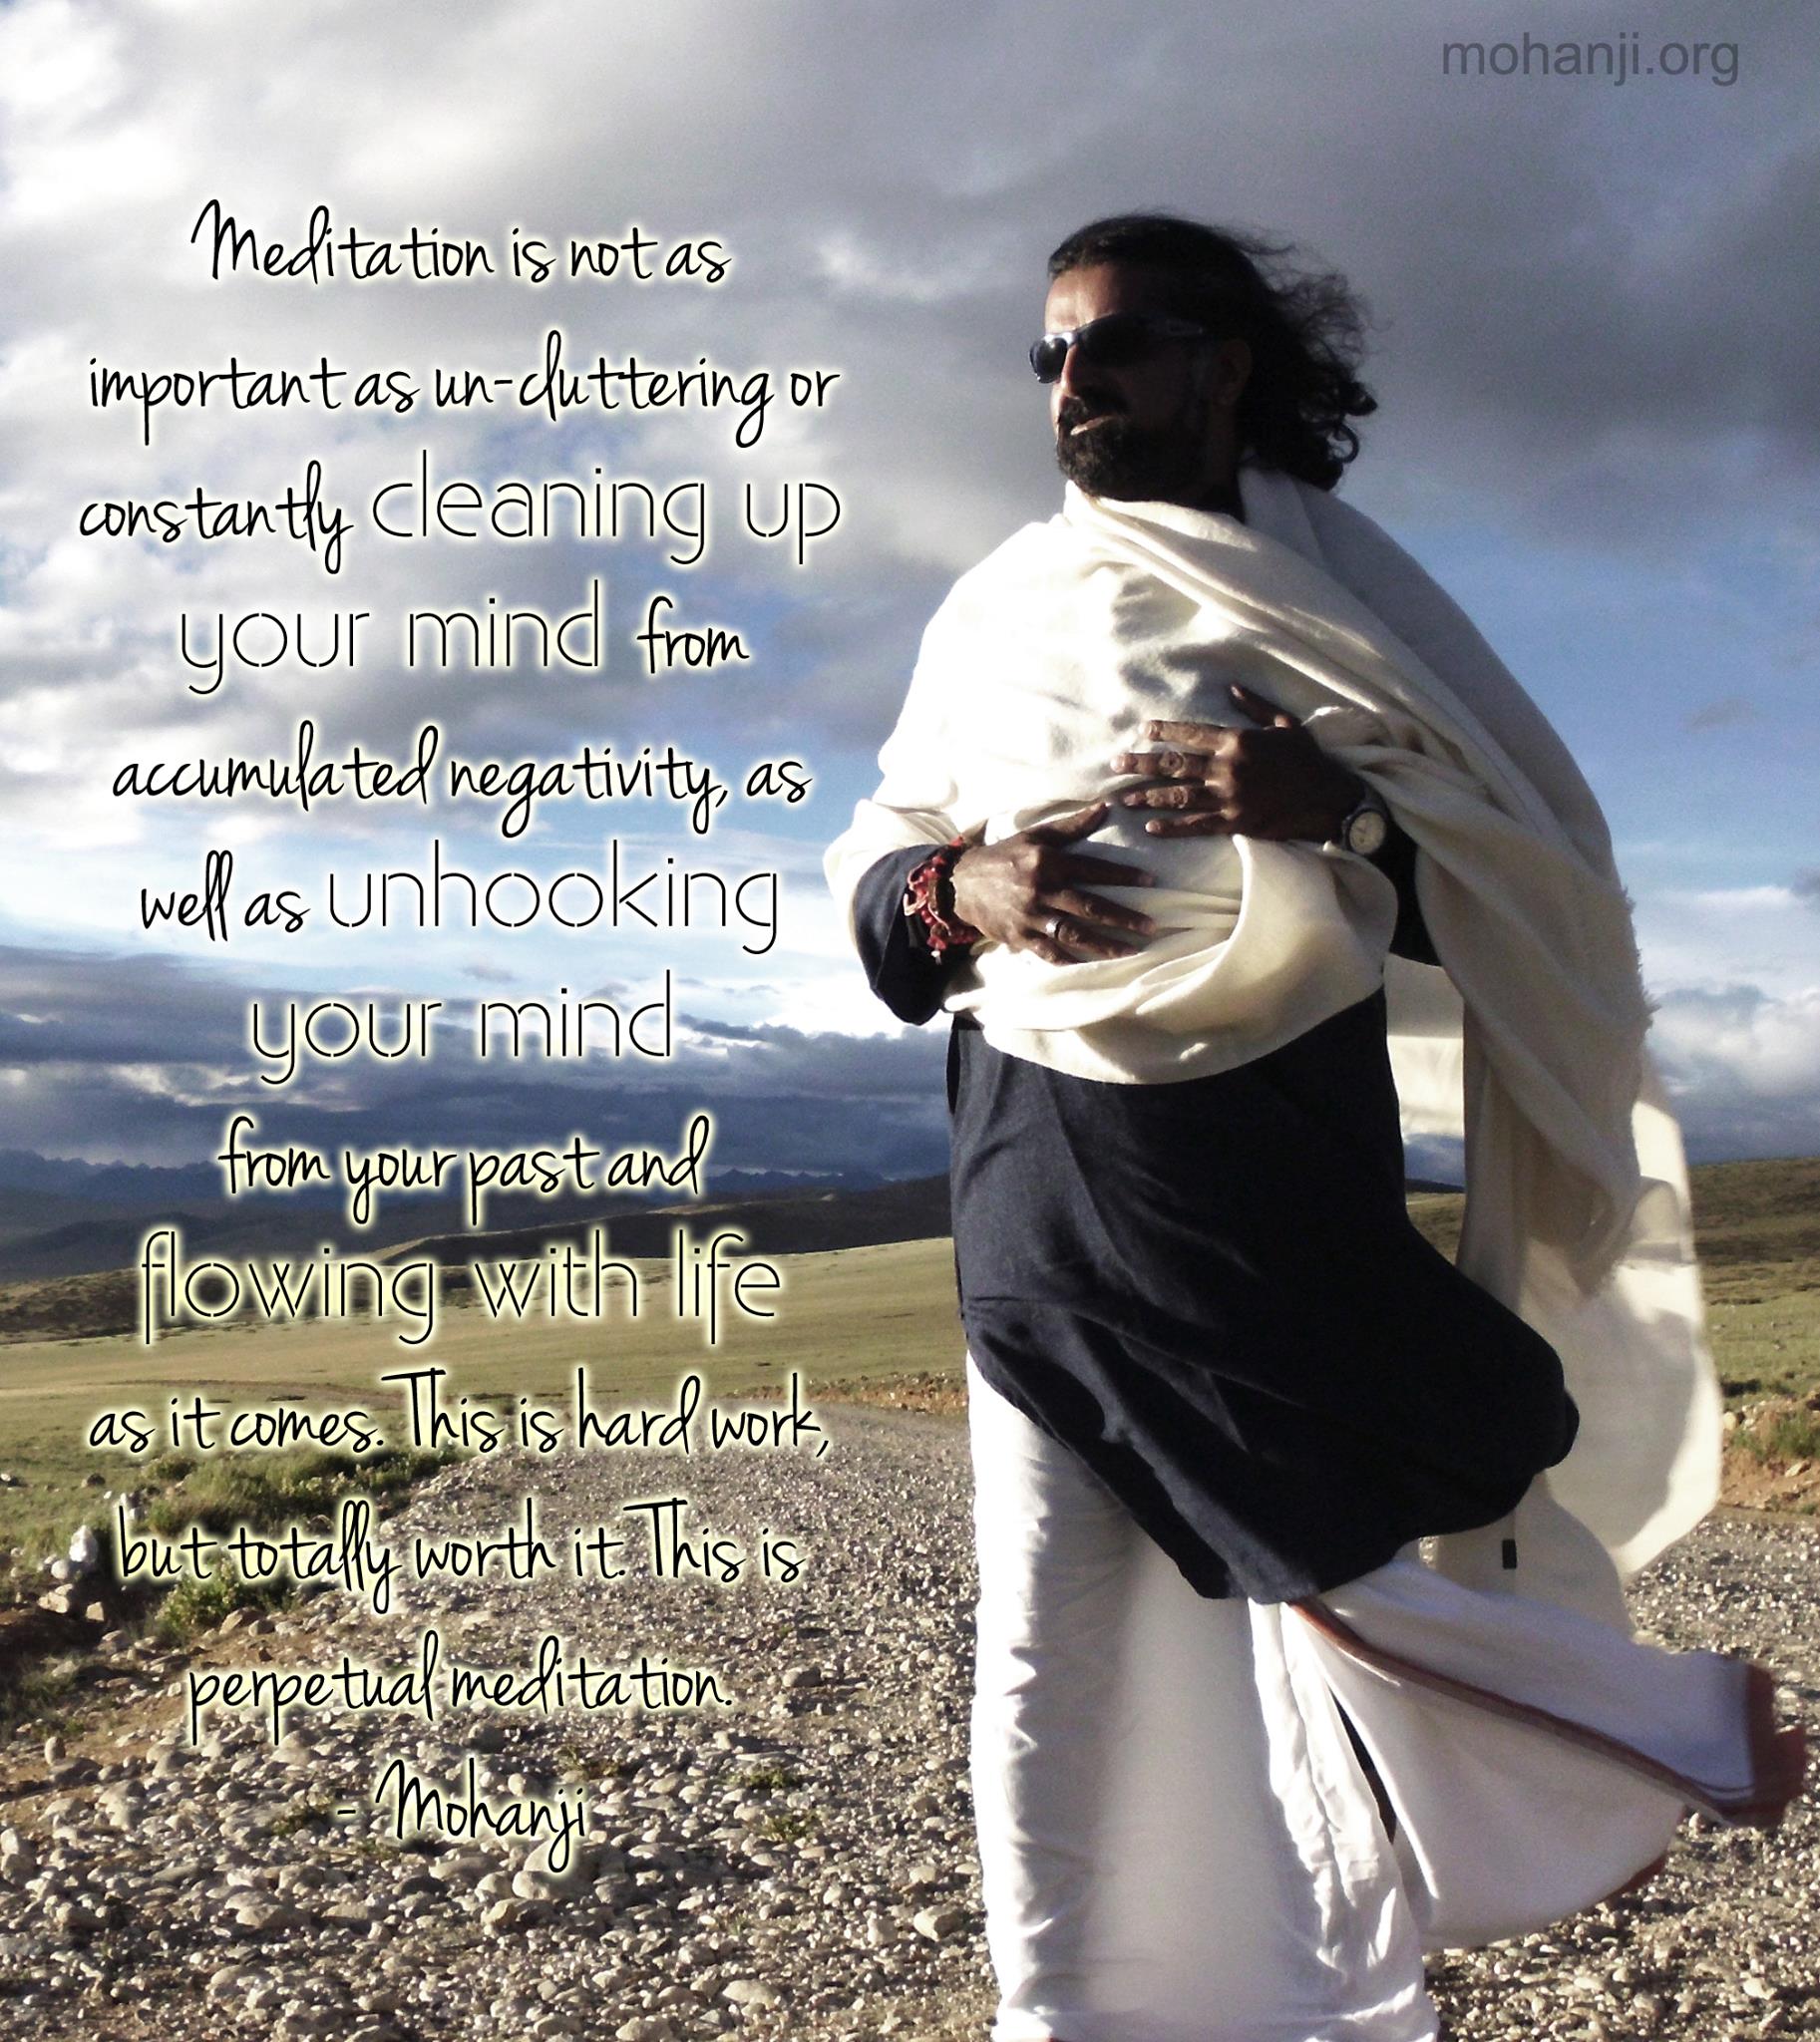 Mohanji quote Meditation is not as important as un-cluttering